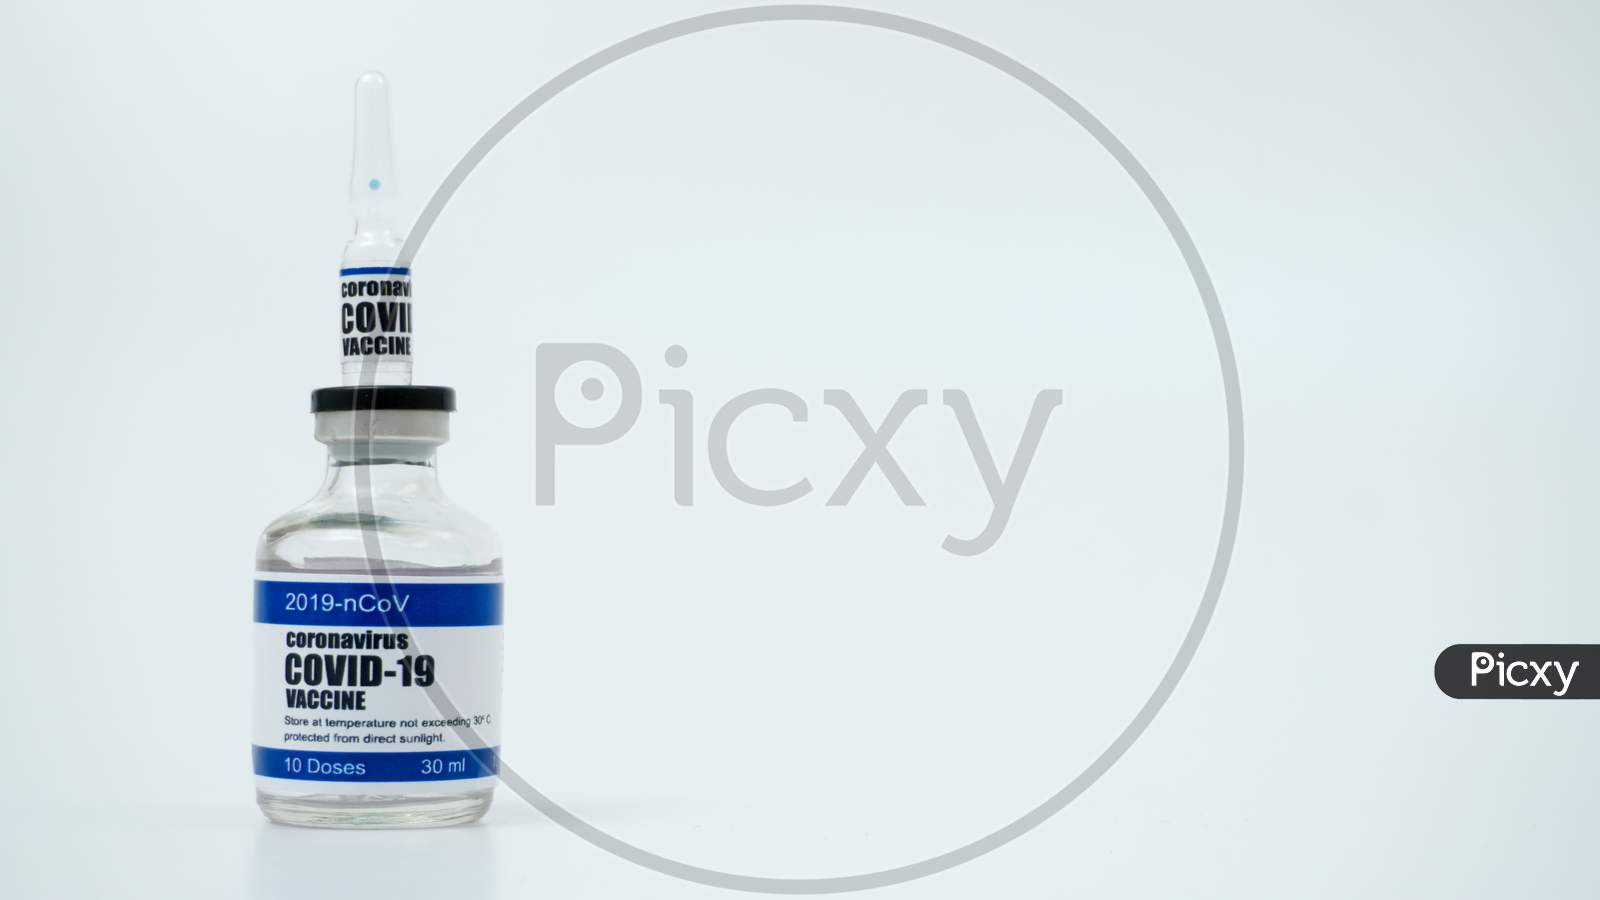 Covid-19 Corona Virus 2019-Ncov Vaccine Injection Vials Medicine Drug Ampoule Bottle. Vaccination, Immunization, Treatment To Cure Covid-19 Corona Virus Infection. Healthcare And Medical Concept.